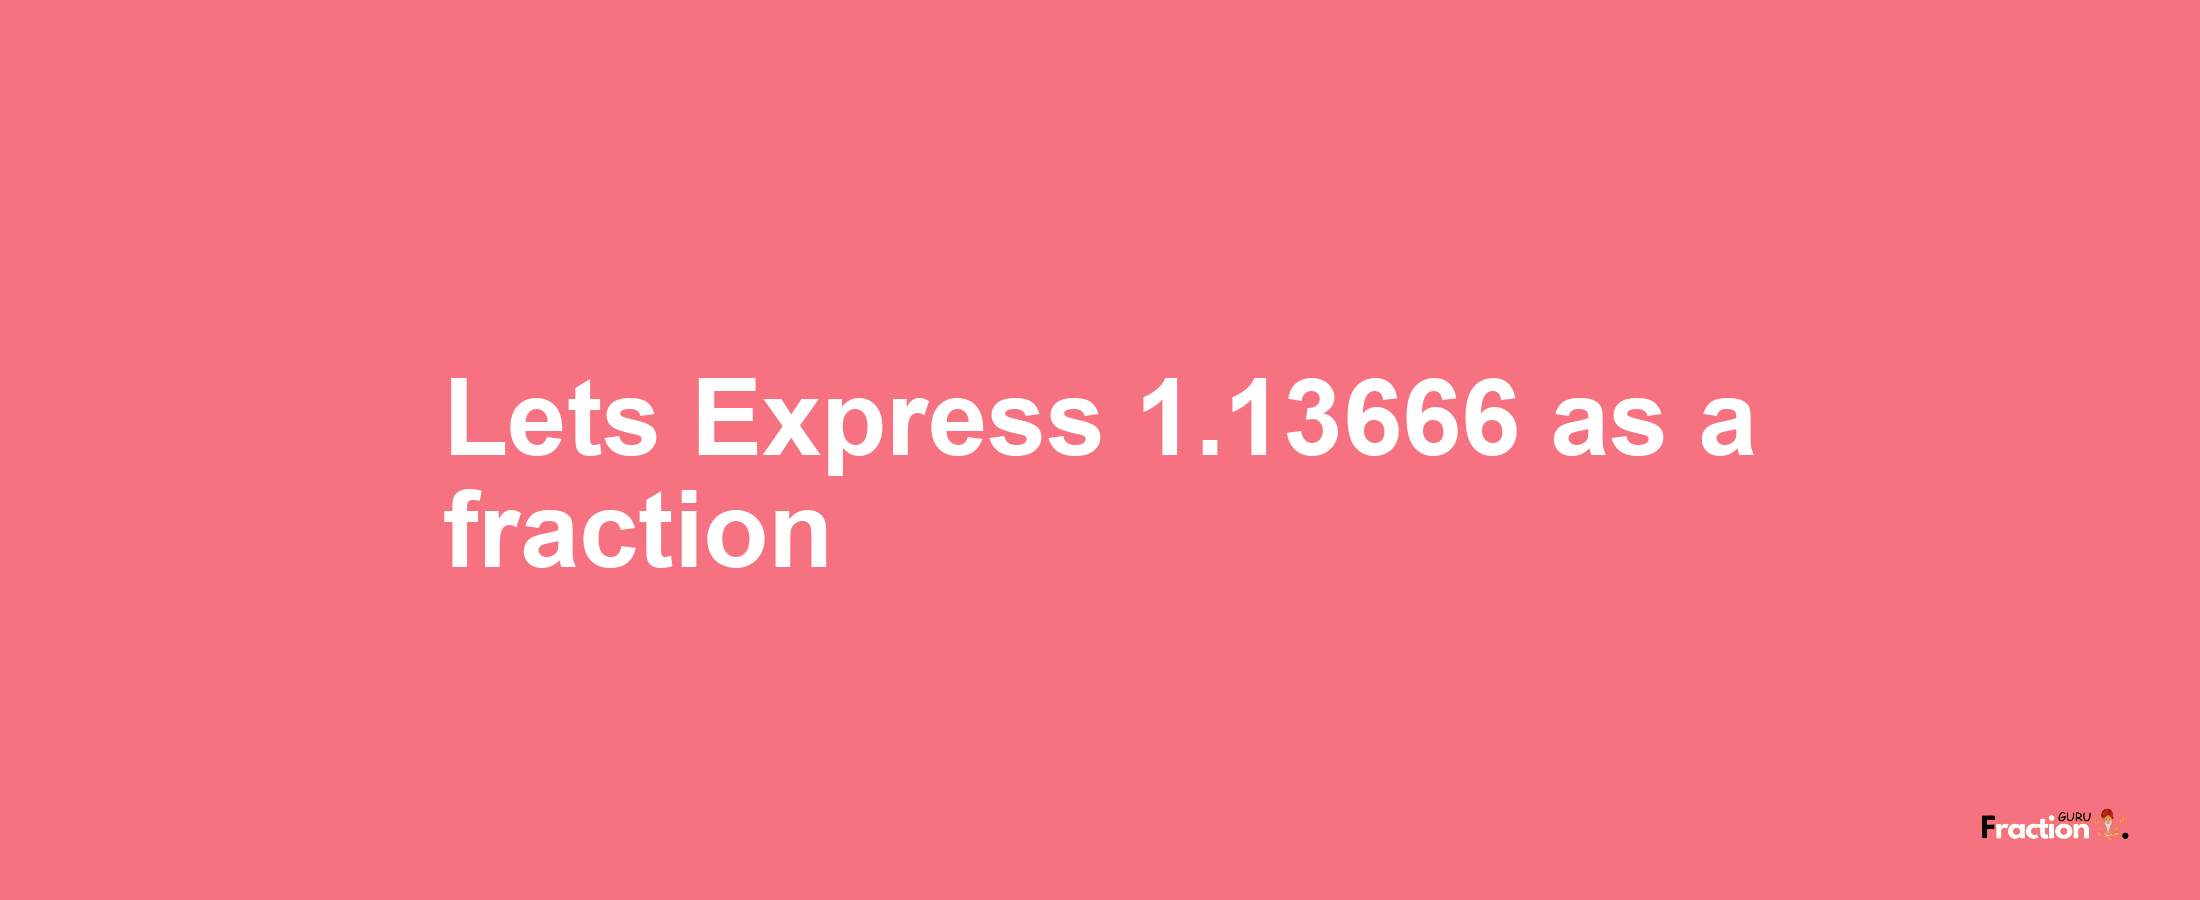 Lets Express 1.13666 as afraction